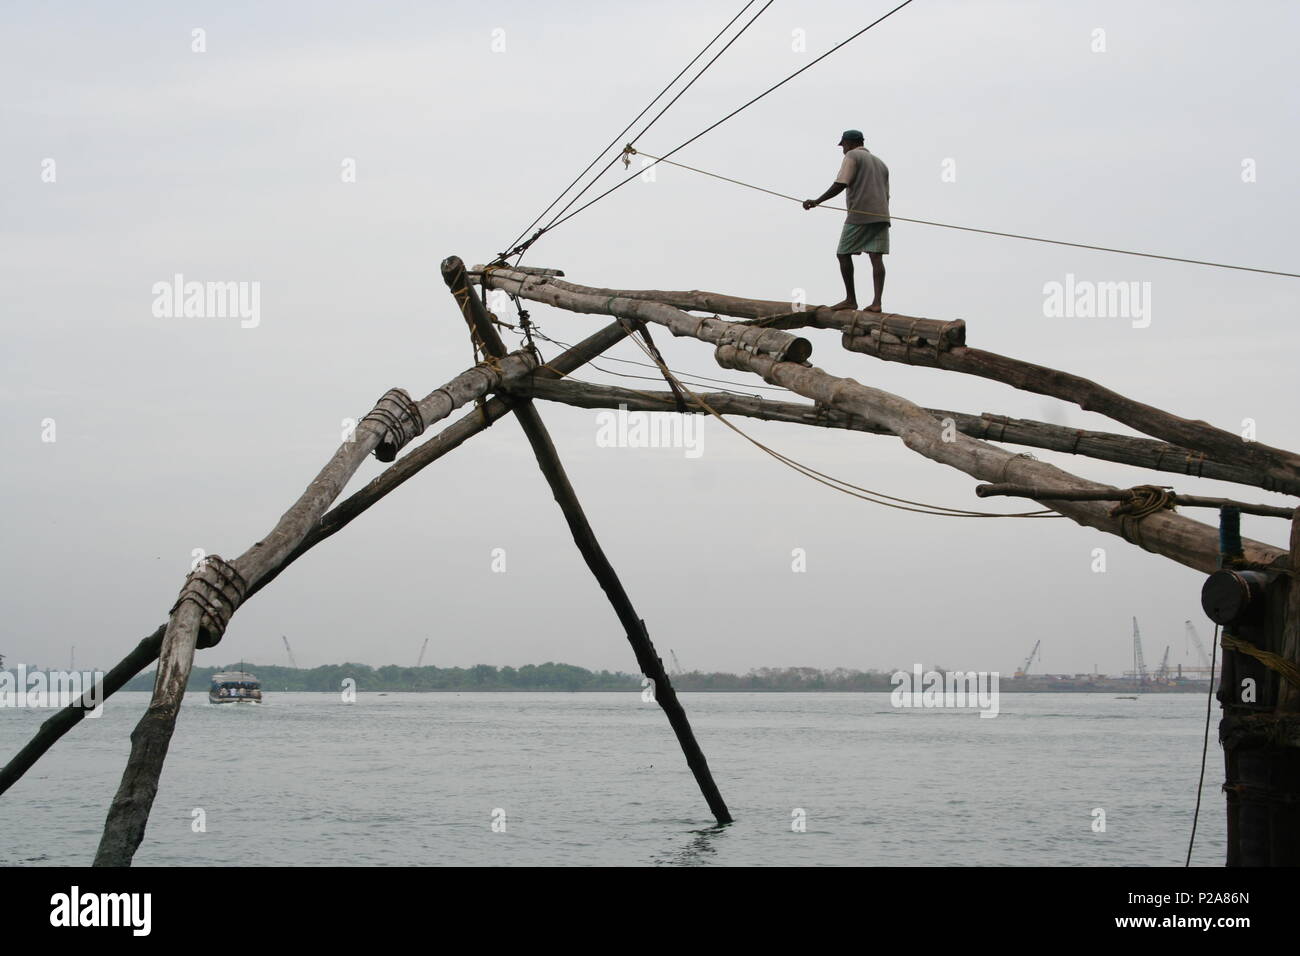 Indian fisherman balancing with rope and wood fixing Chinese fishing net Stock Photo